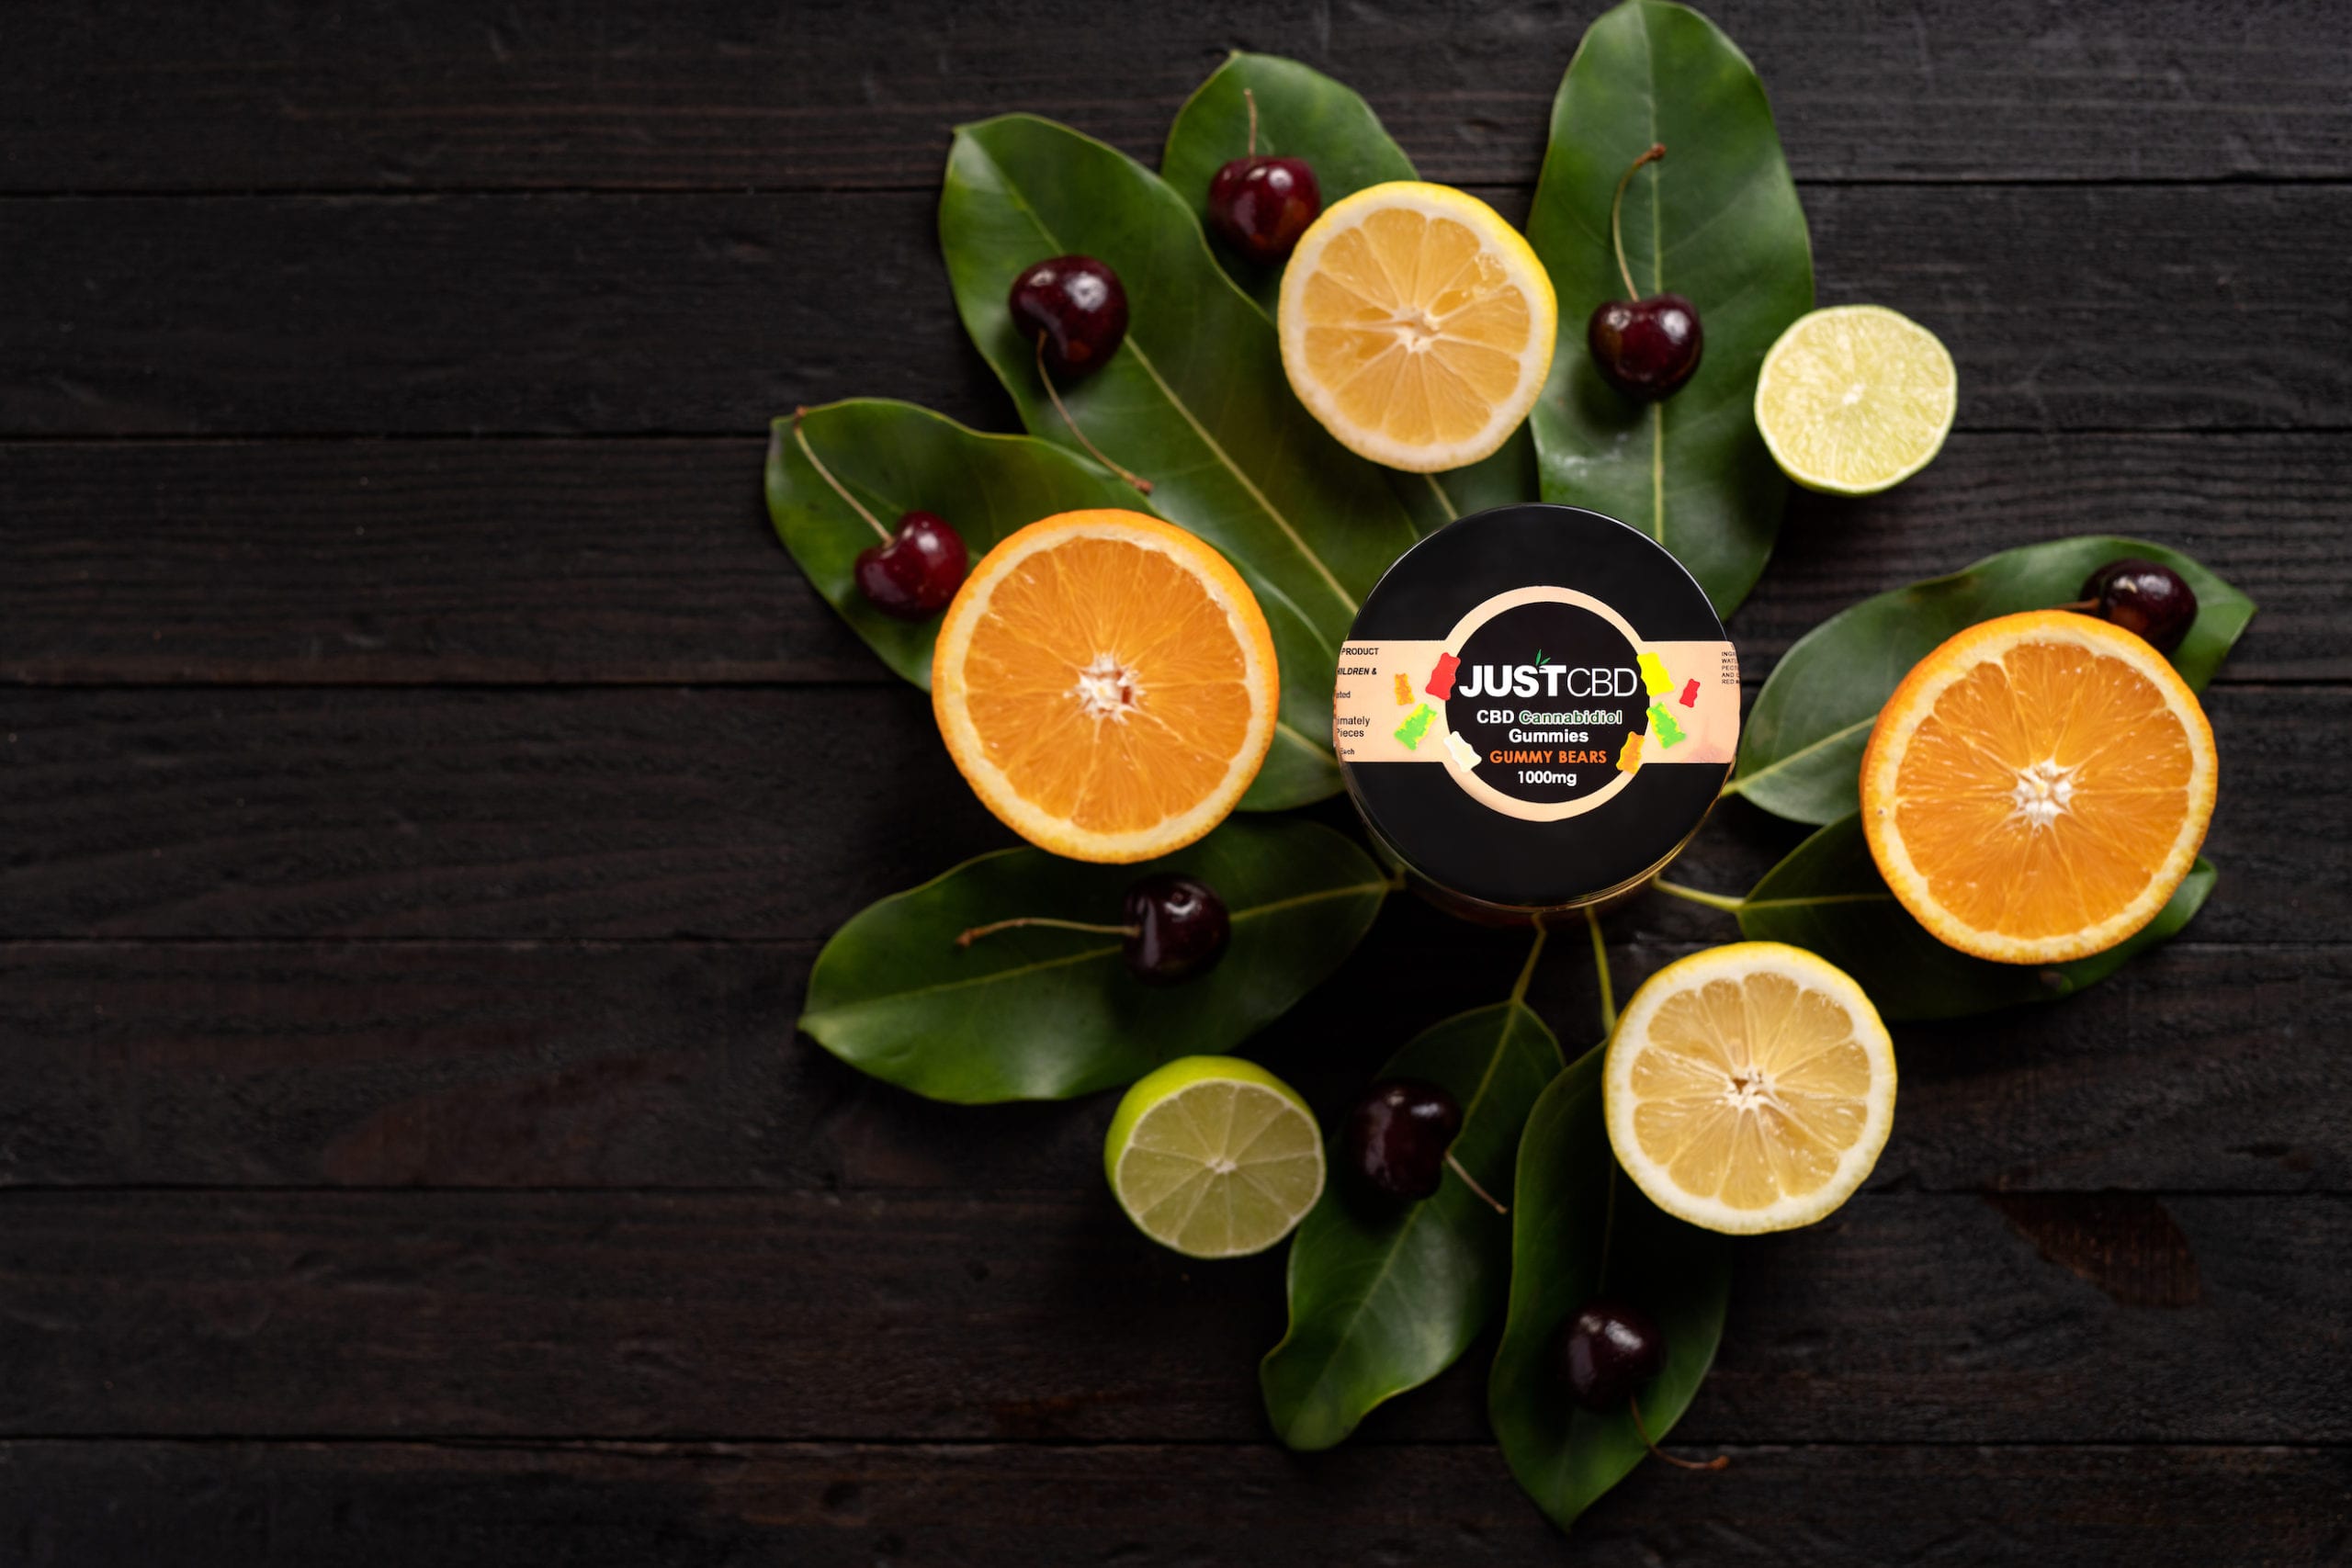 JustCBD Product Photography and Just CBD Products Overhead view of JUSTCBD gummy bears container on display surrounded by sliced citrus fruit and cherries on green leaves on a wooden table